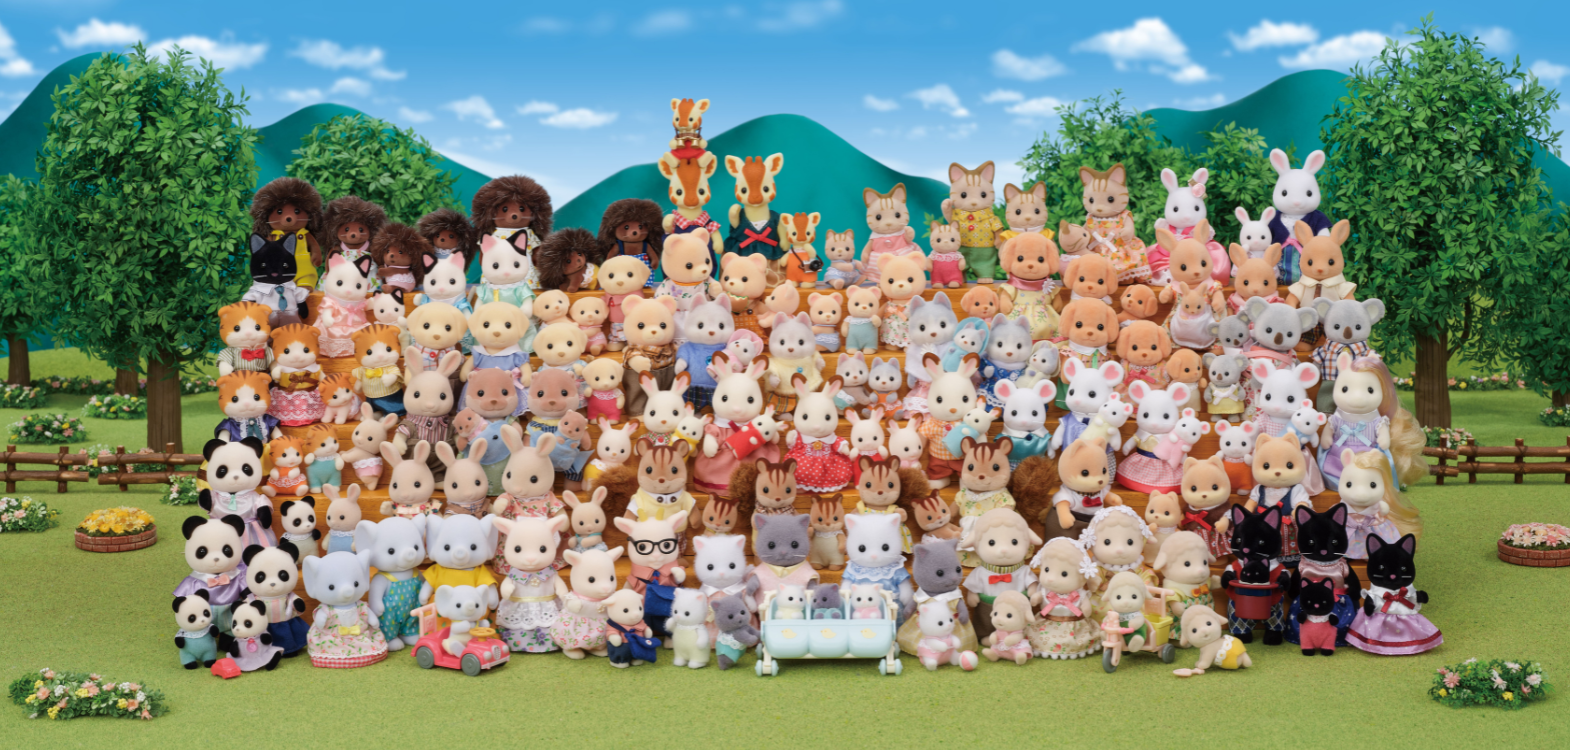 A group picture of many Calico Critters families